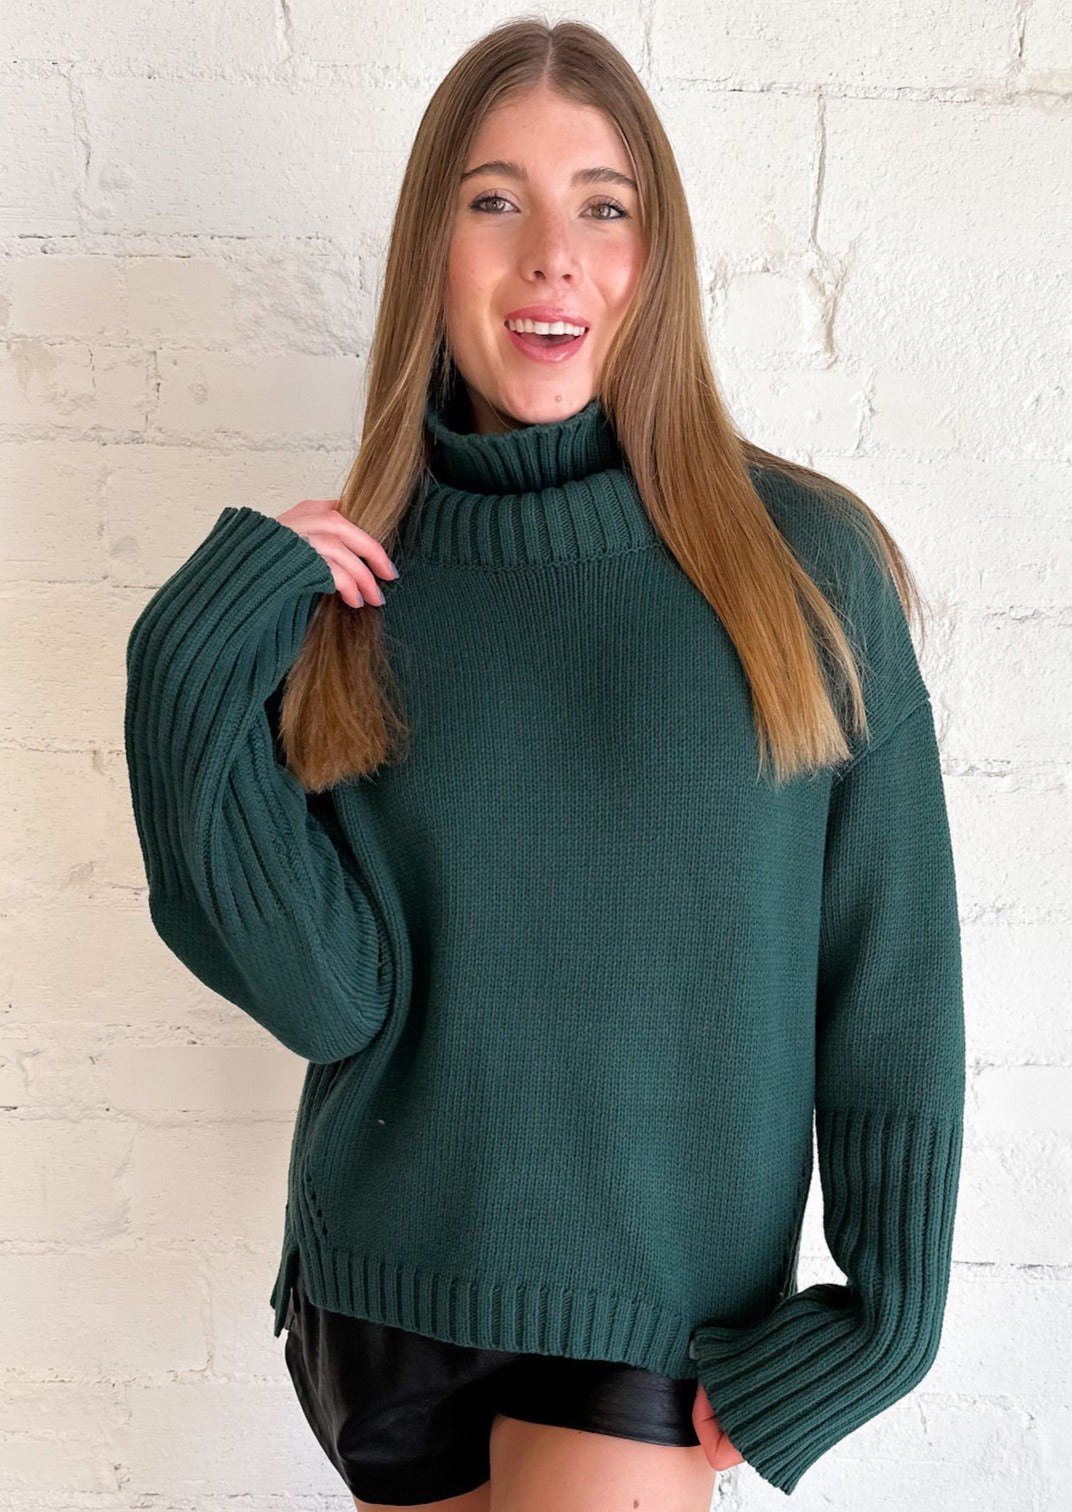 Alpine Forest Sweater, Tops, Adeline, Adeline, dallas boutique, dallas texas, texas boutique, women's boutique dallas, adeline boutique, dallas boutique, trendy boutique, affordable boutique